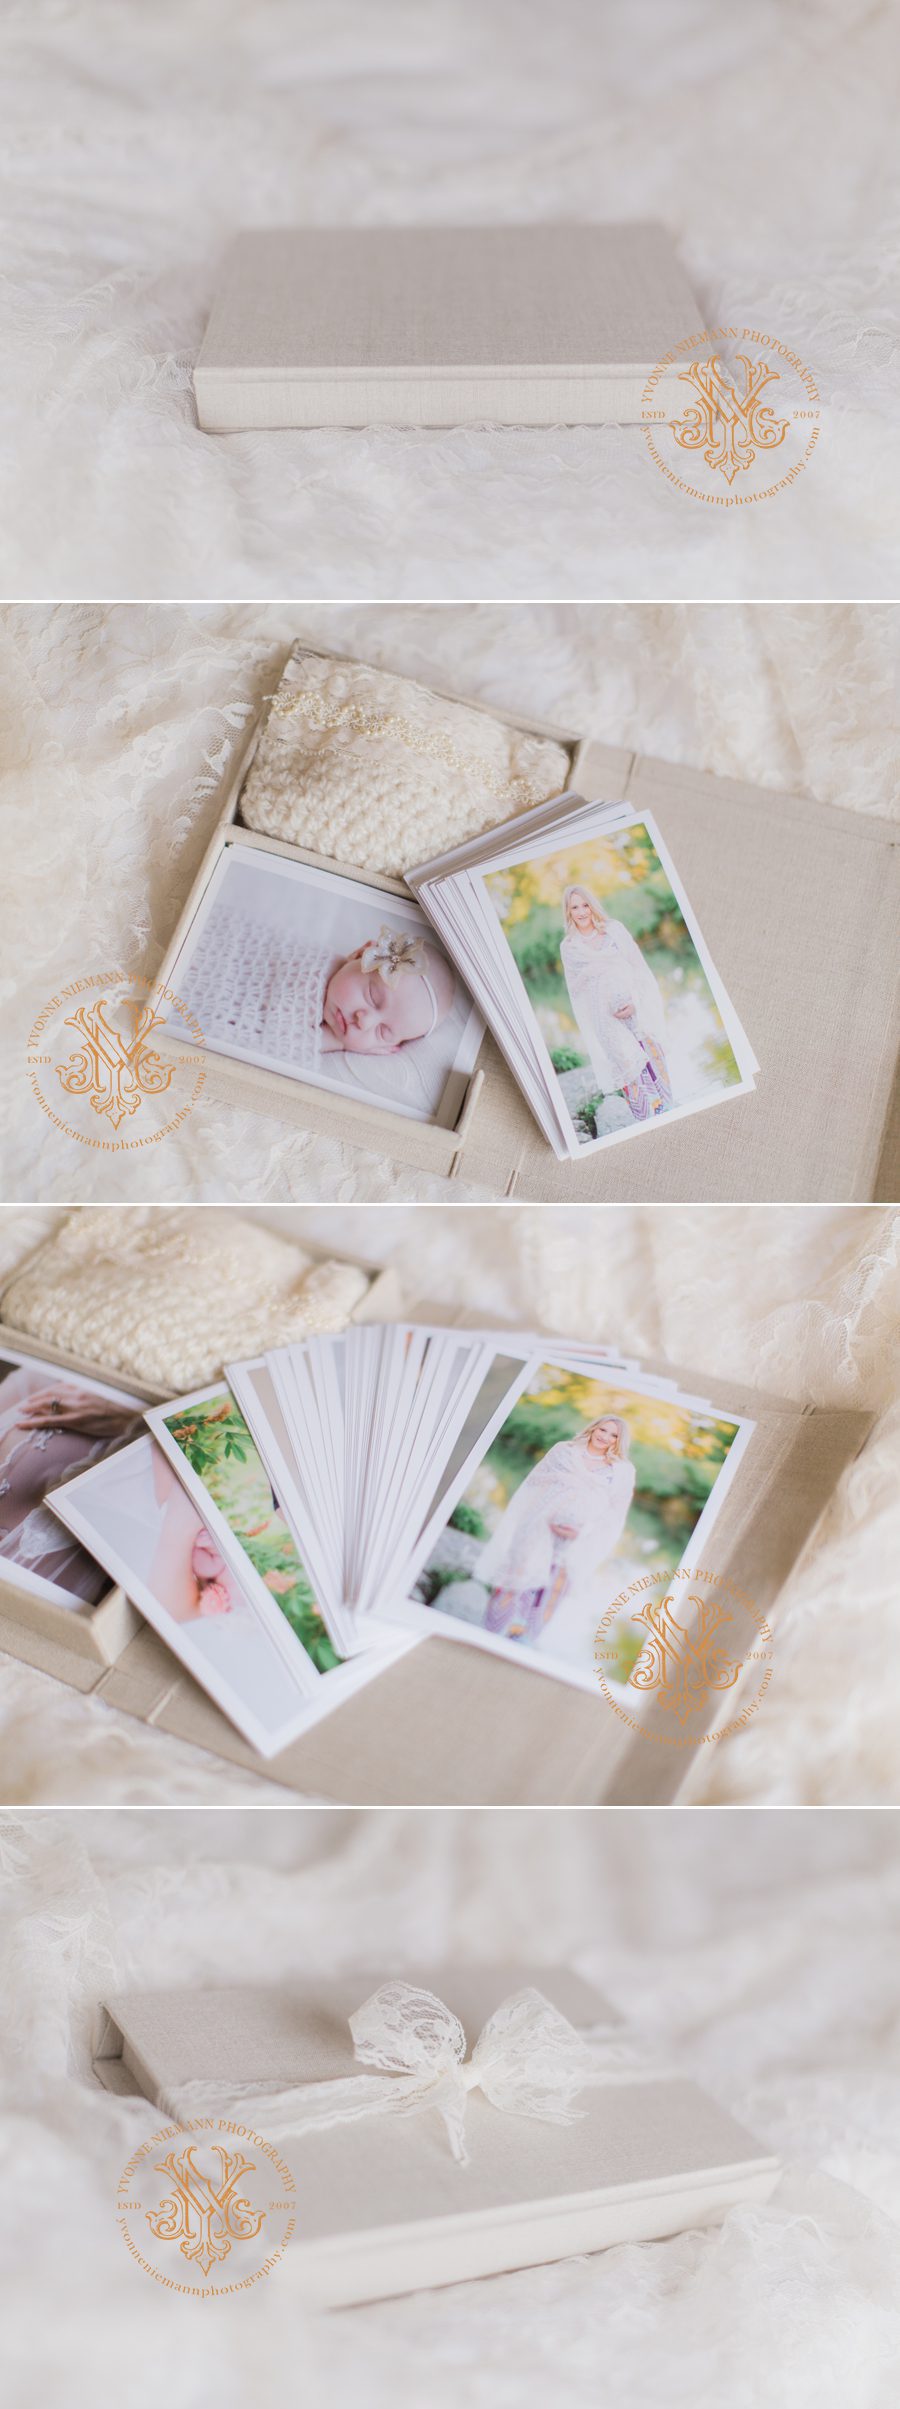 Heirloom image box offered by Athens, GA family photographer is perfect for tiny keepsakes.